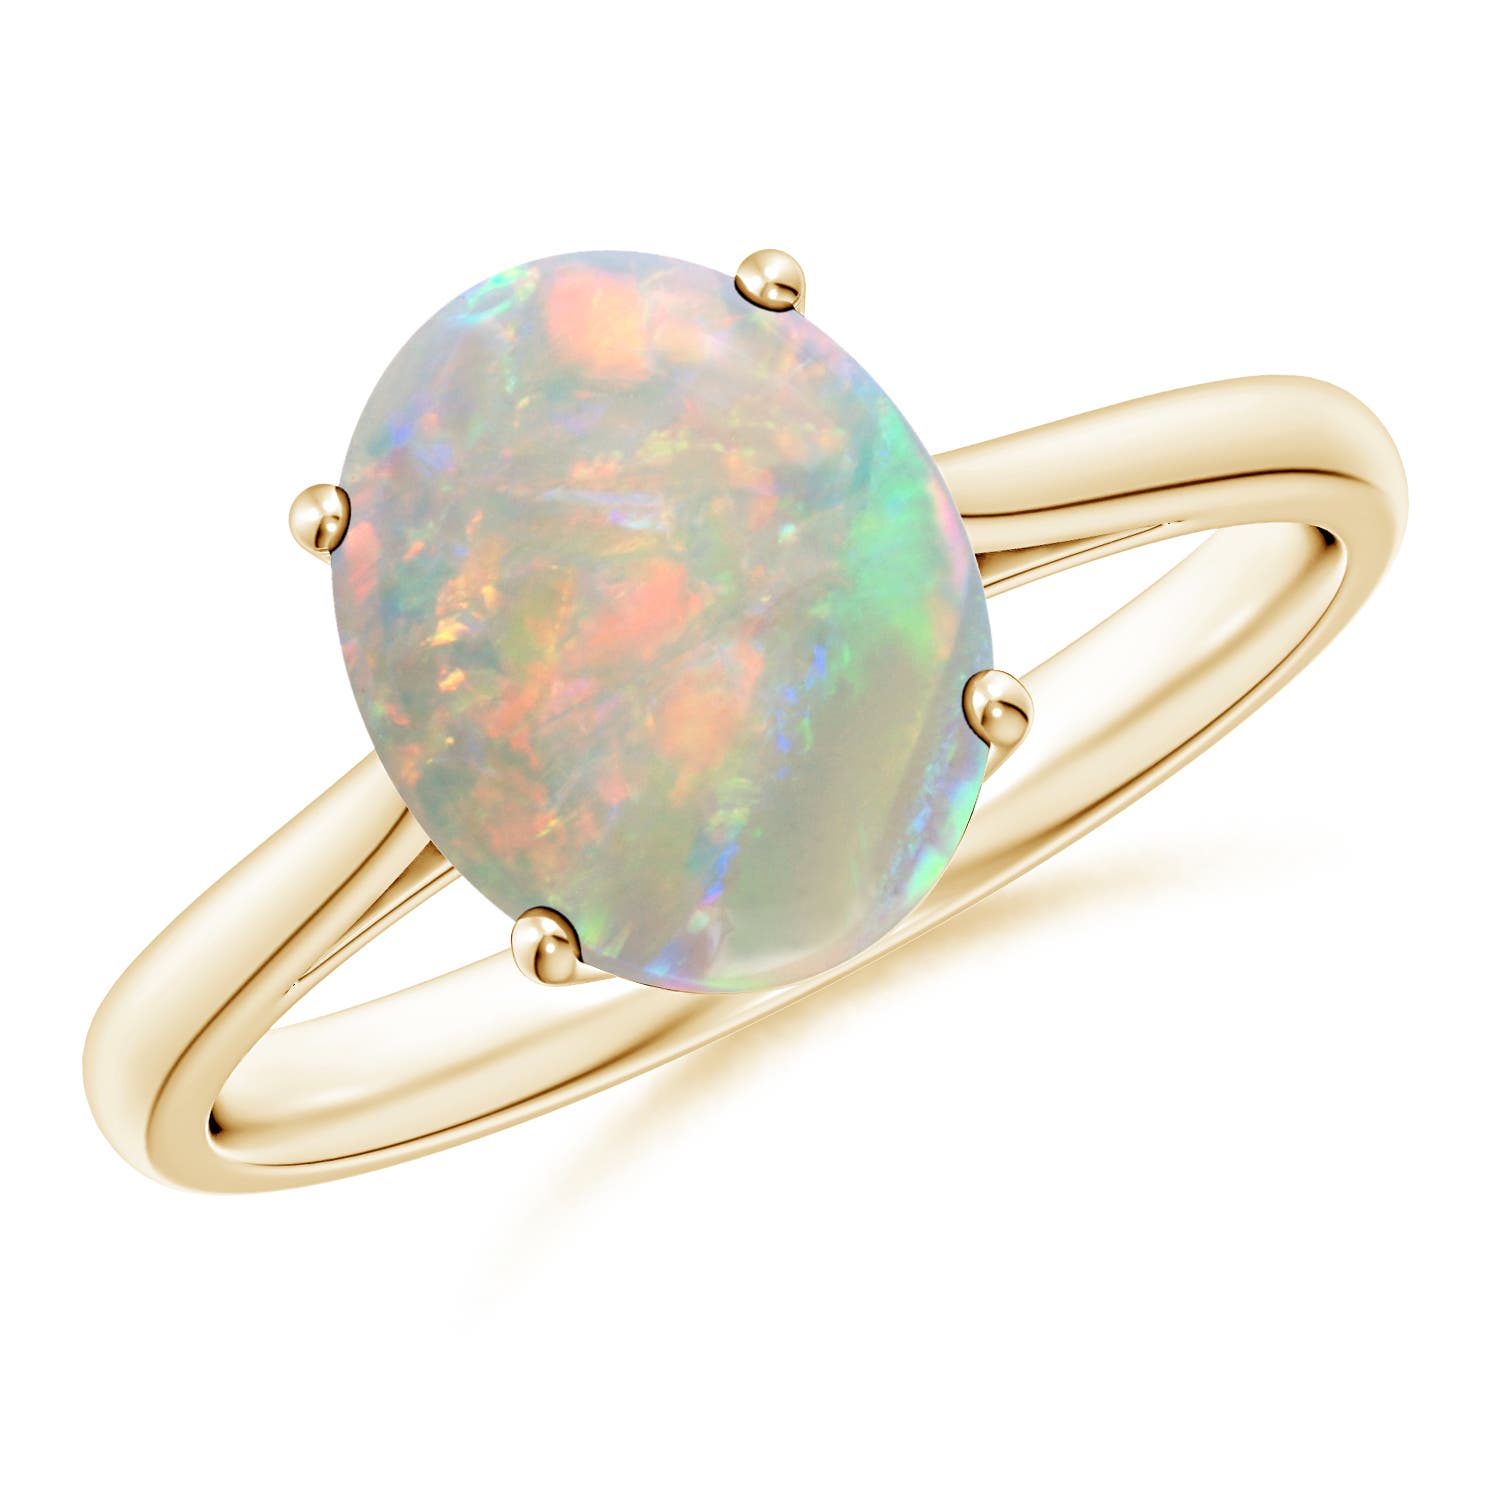 Oval Solitaire Opal Cocktail Ring